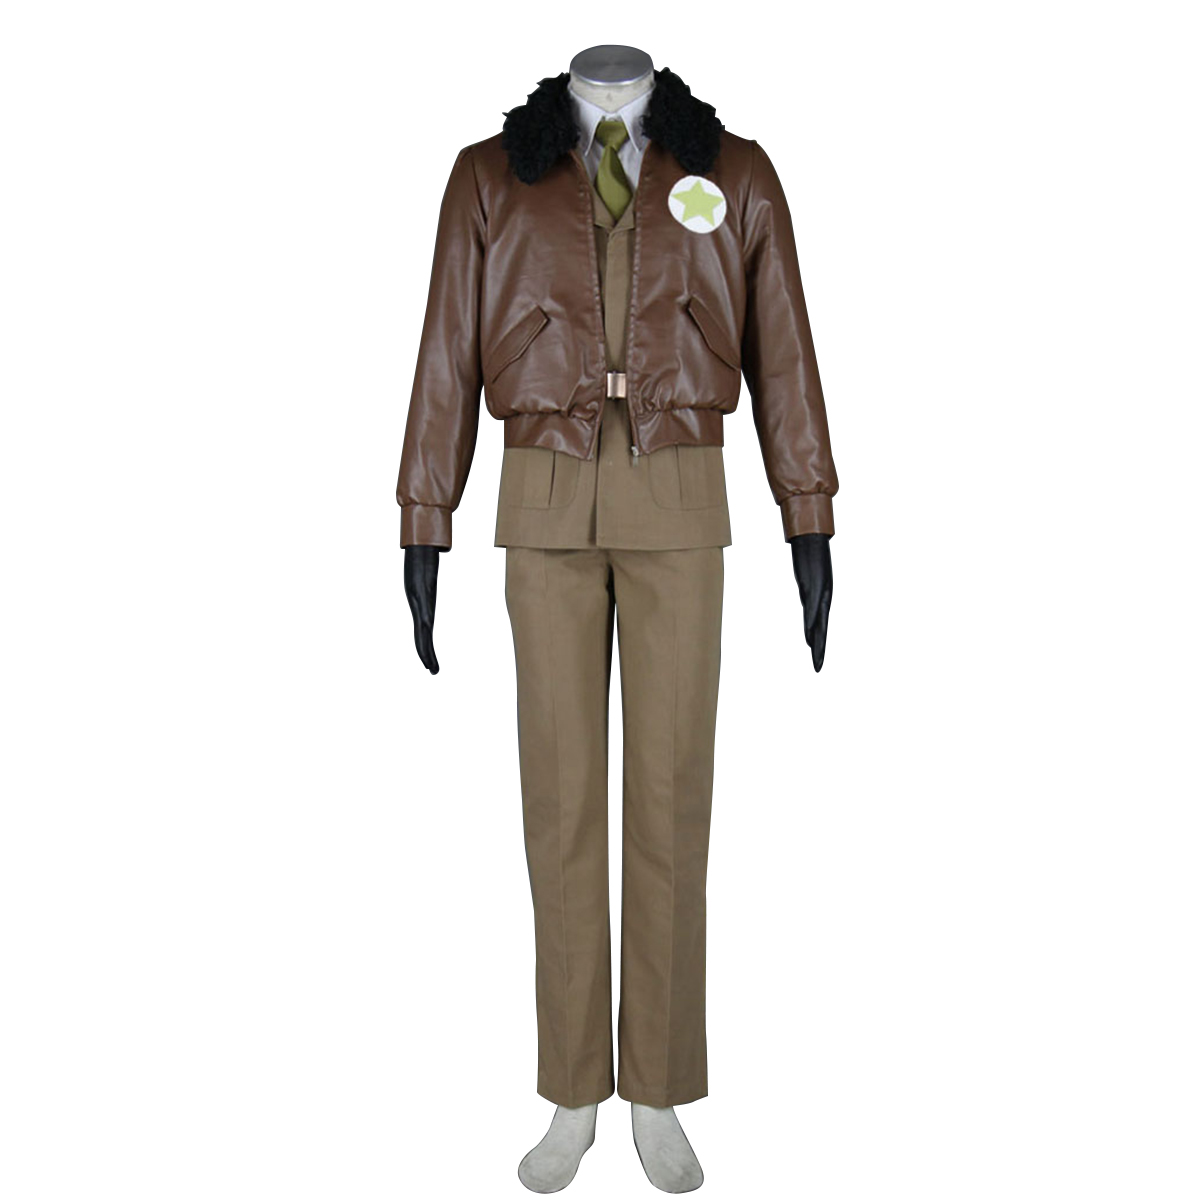 Axis Powers Hetalia APH America Alfred F Jones 1 Anime Cosplay Costumes Outfit